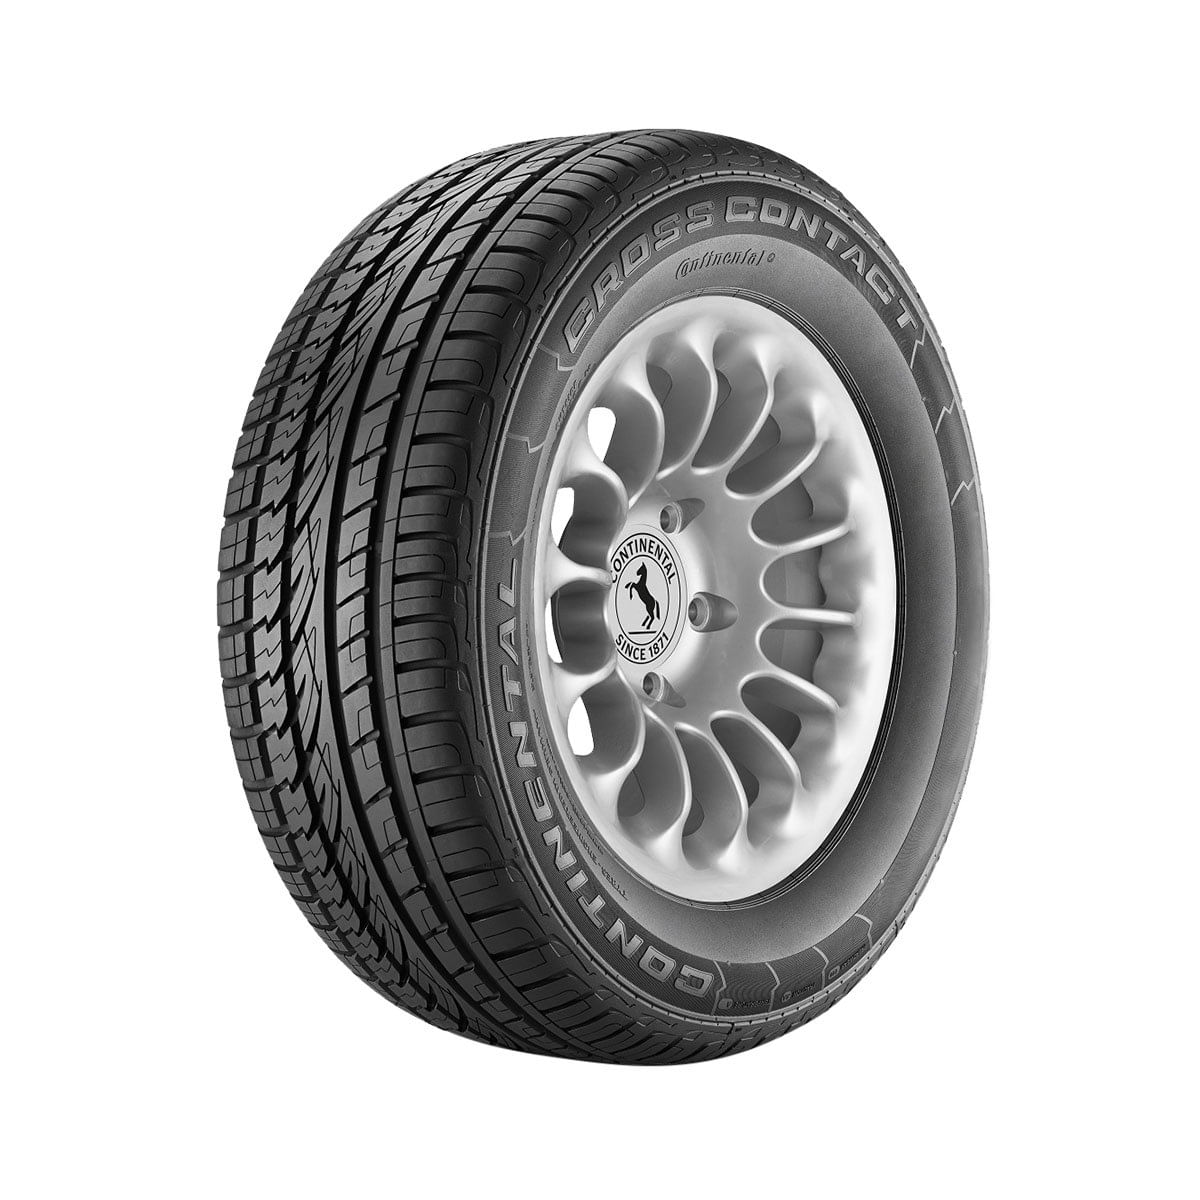 5745284_Pneu Aro 18 255/60 R 18 Continental CrossContact UHP 3548840000_1_Zoom